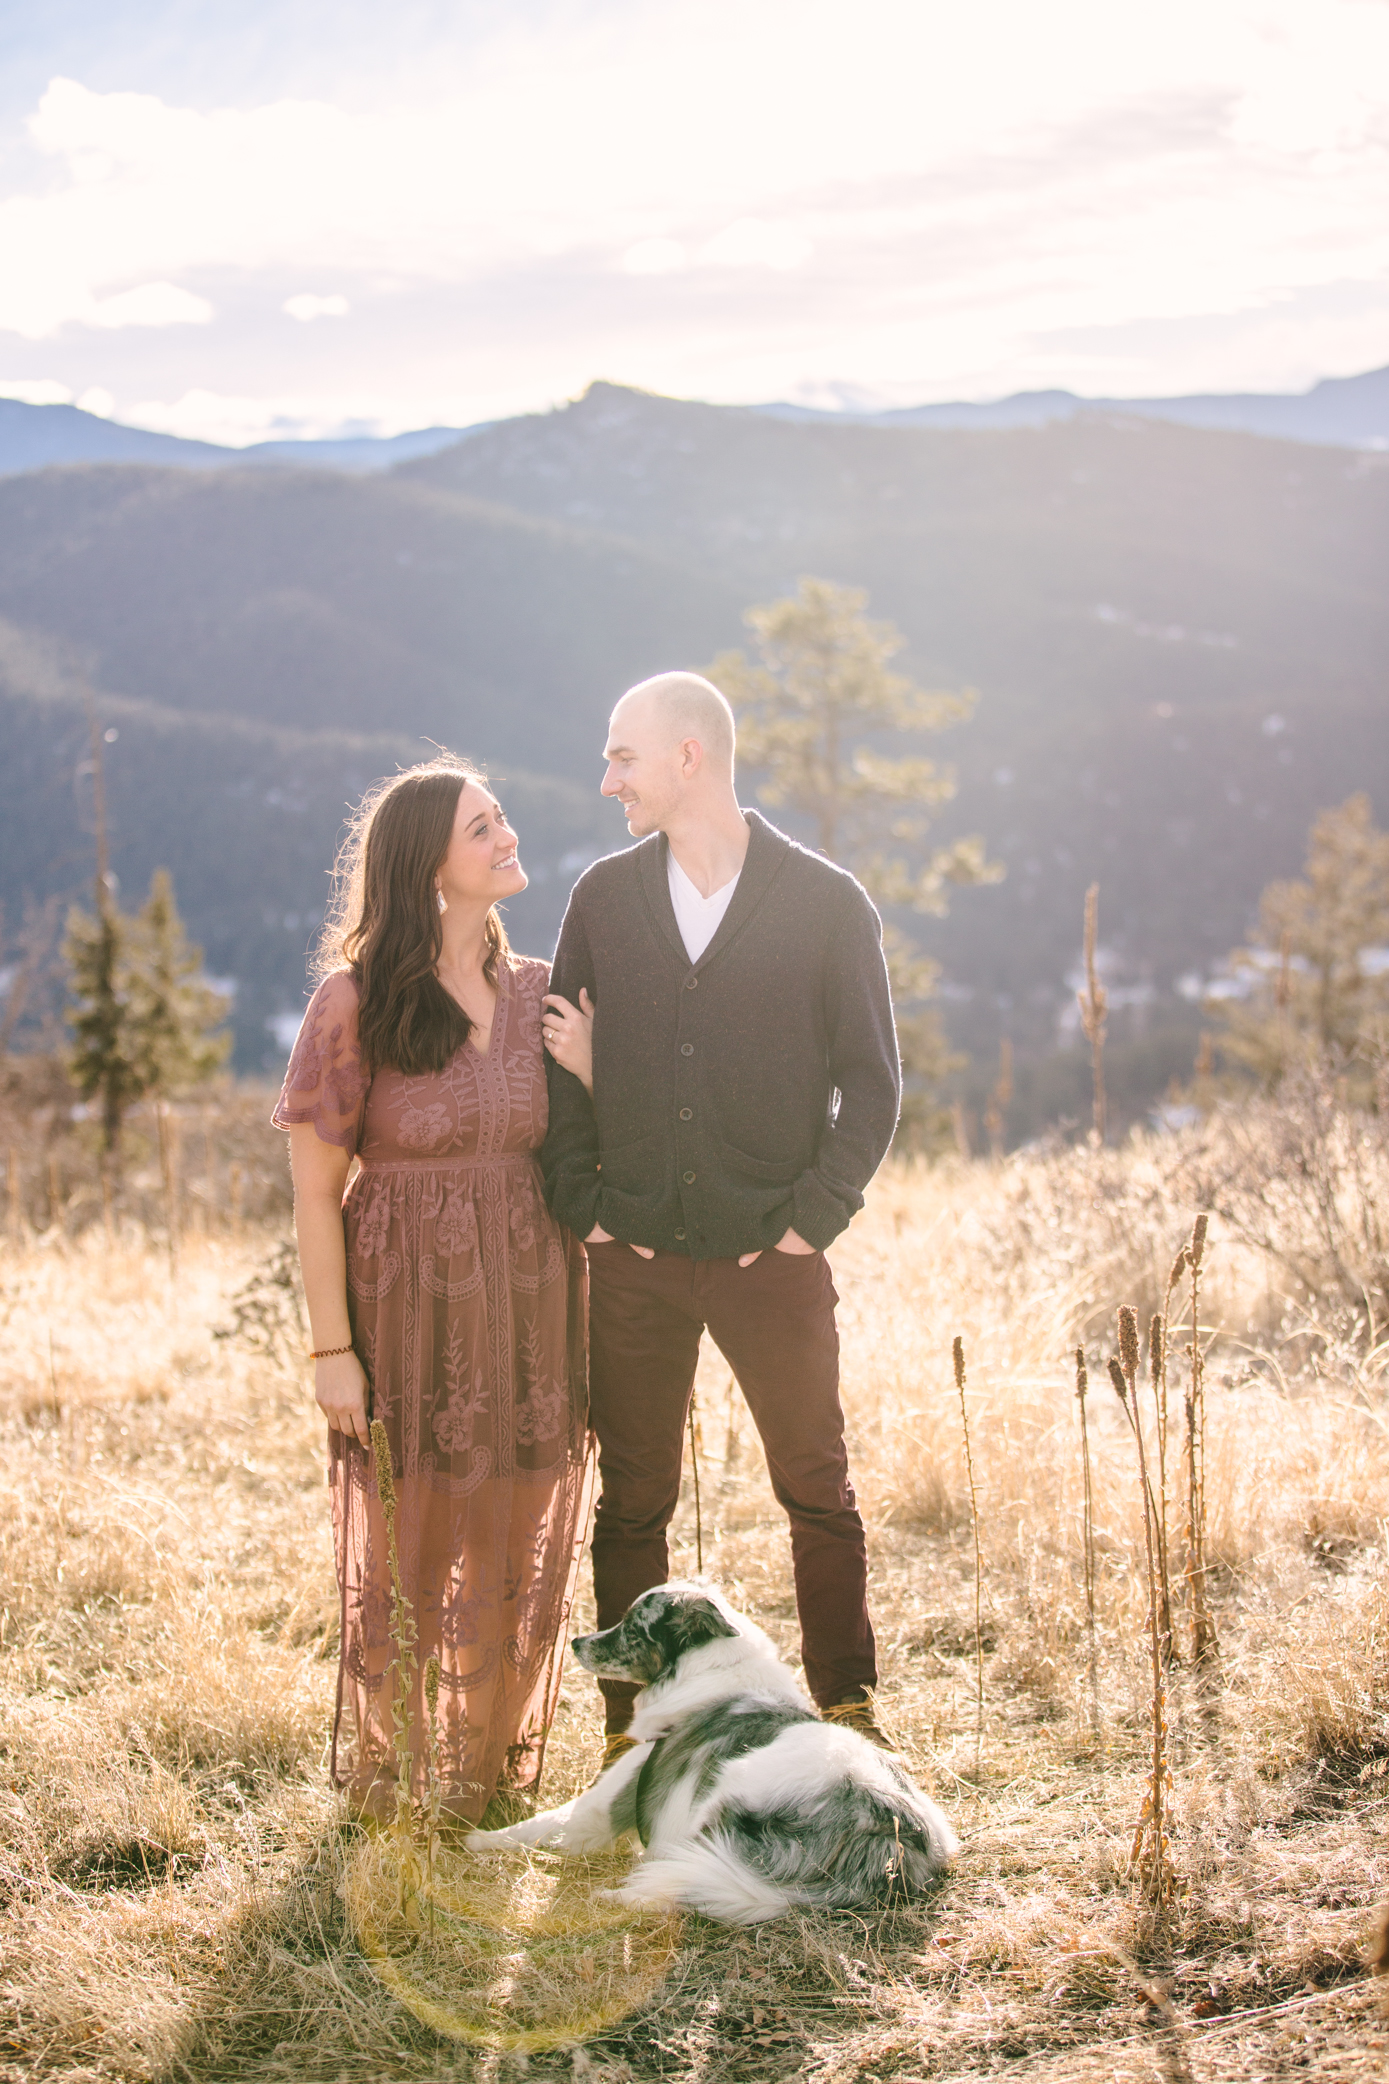 Style tips for amazing engagement pictures: coordinating your looks.